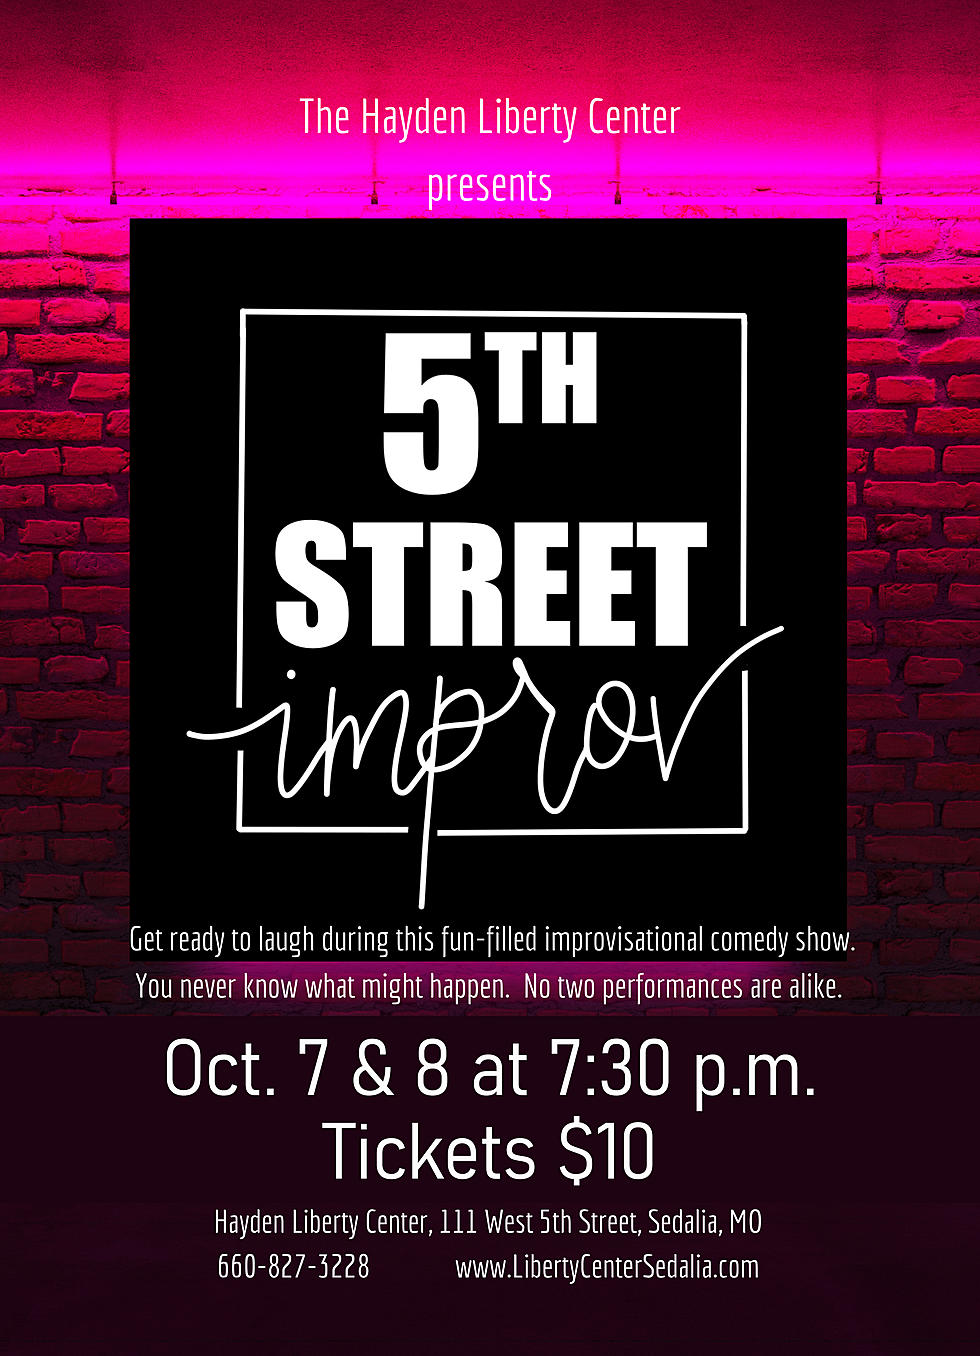 5th Street Improv Group Presents Two Shows This Weekend